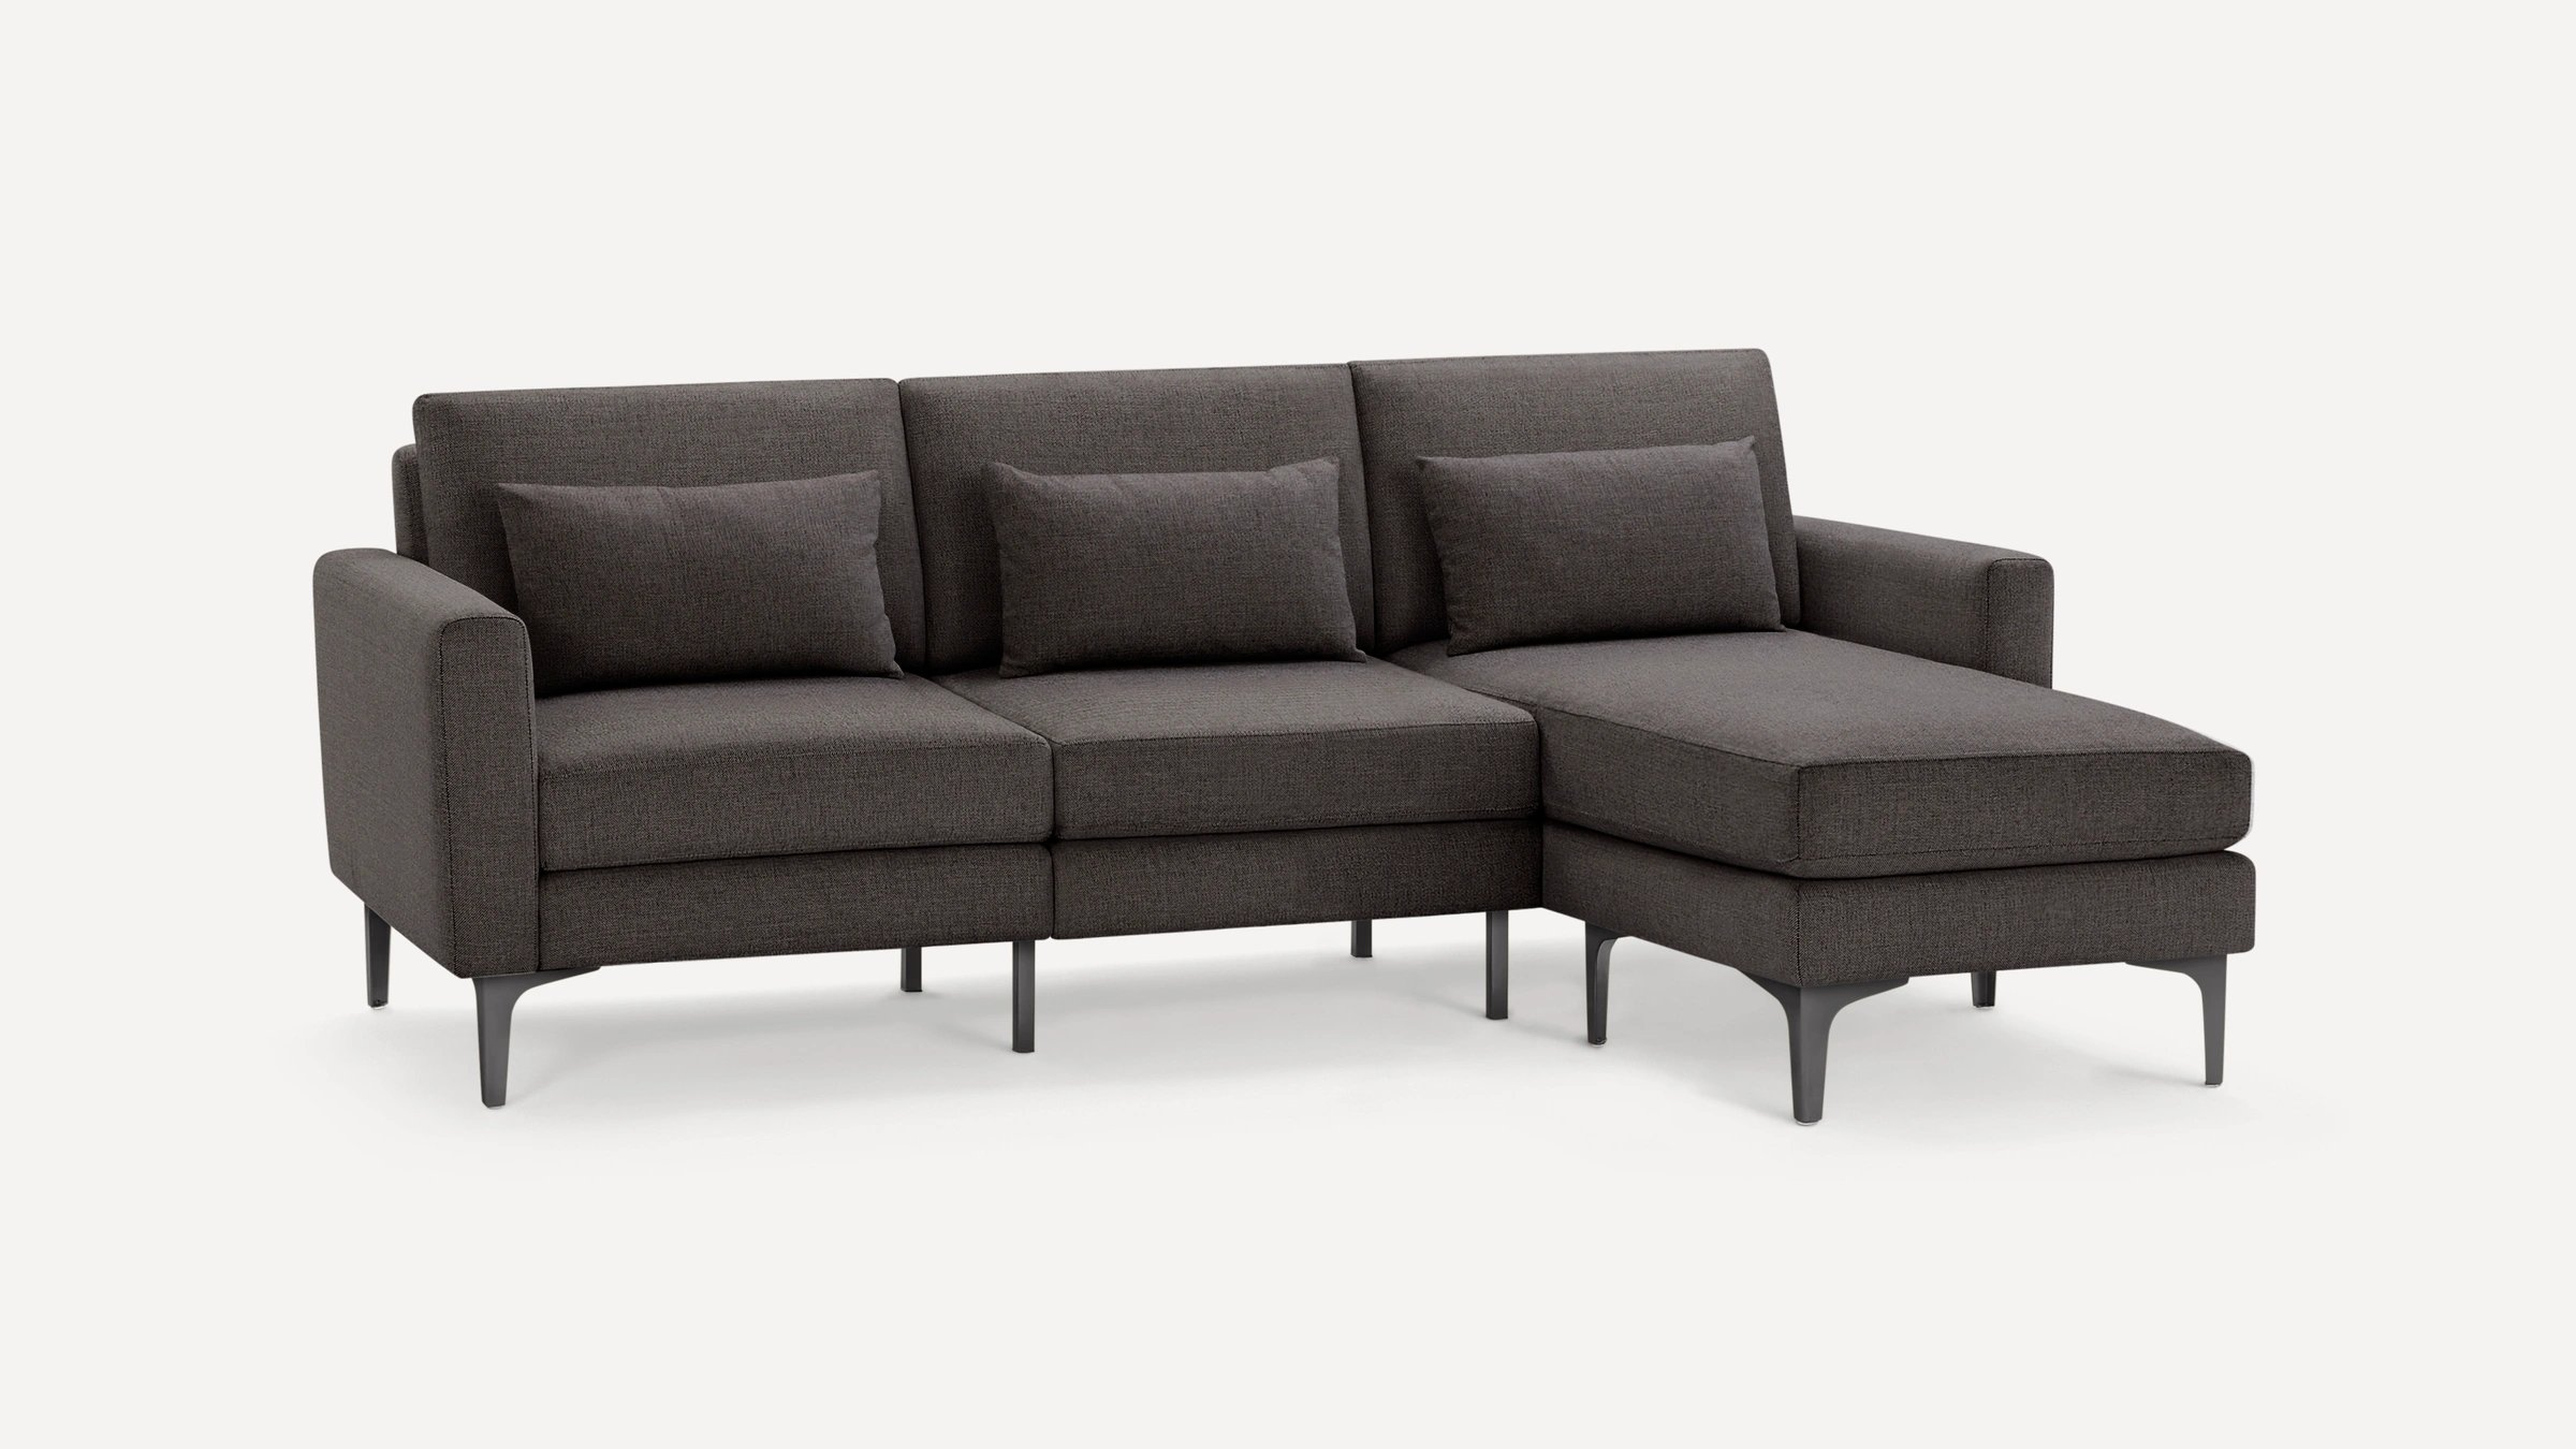 Nomad Sofa Sectional in Charcoal, Black Metal Legs - Burrow